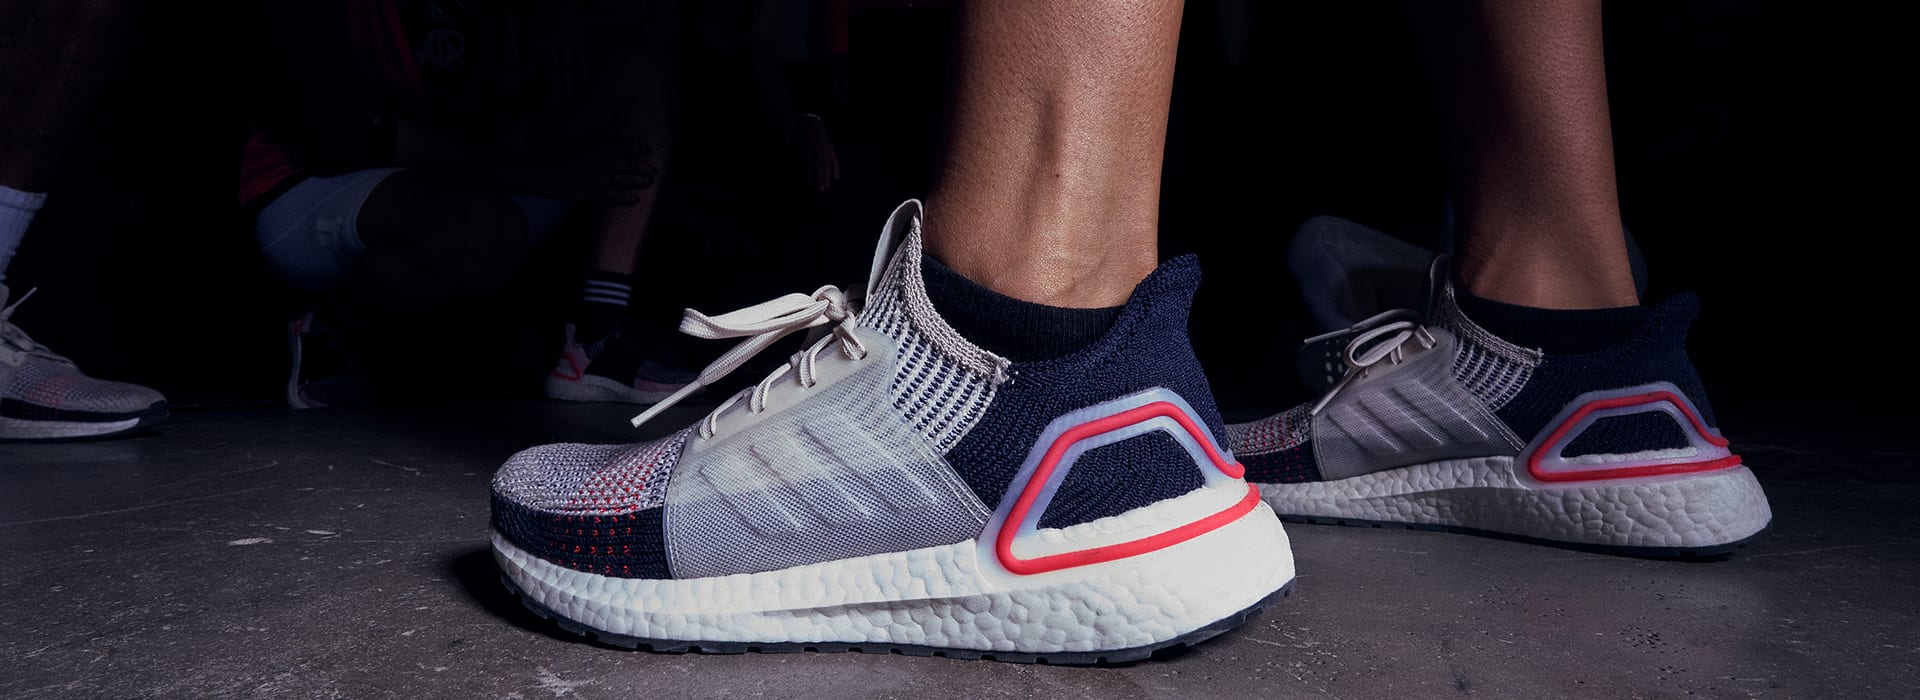 lastig tempel detectie The Only Ultraboost Sizing Guide You'll Ever Need